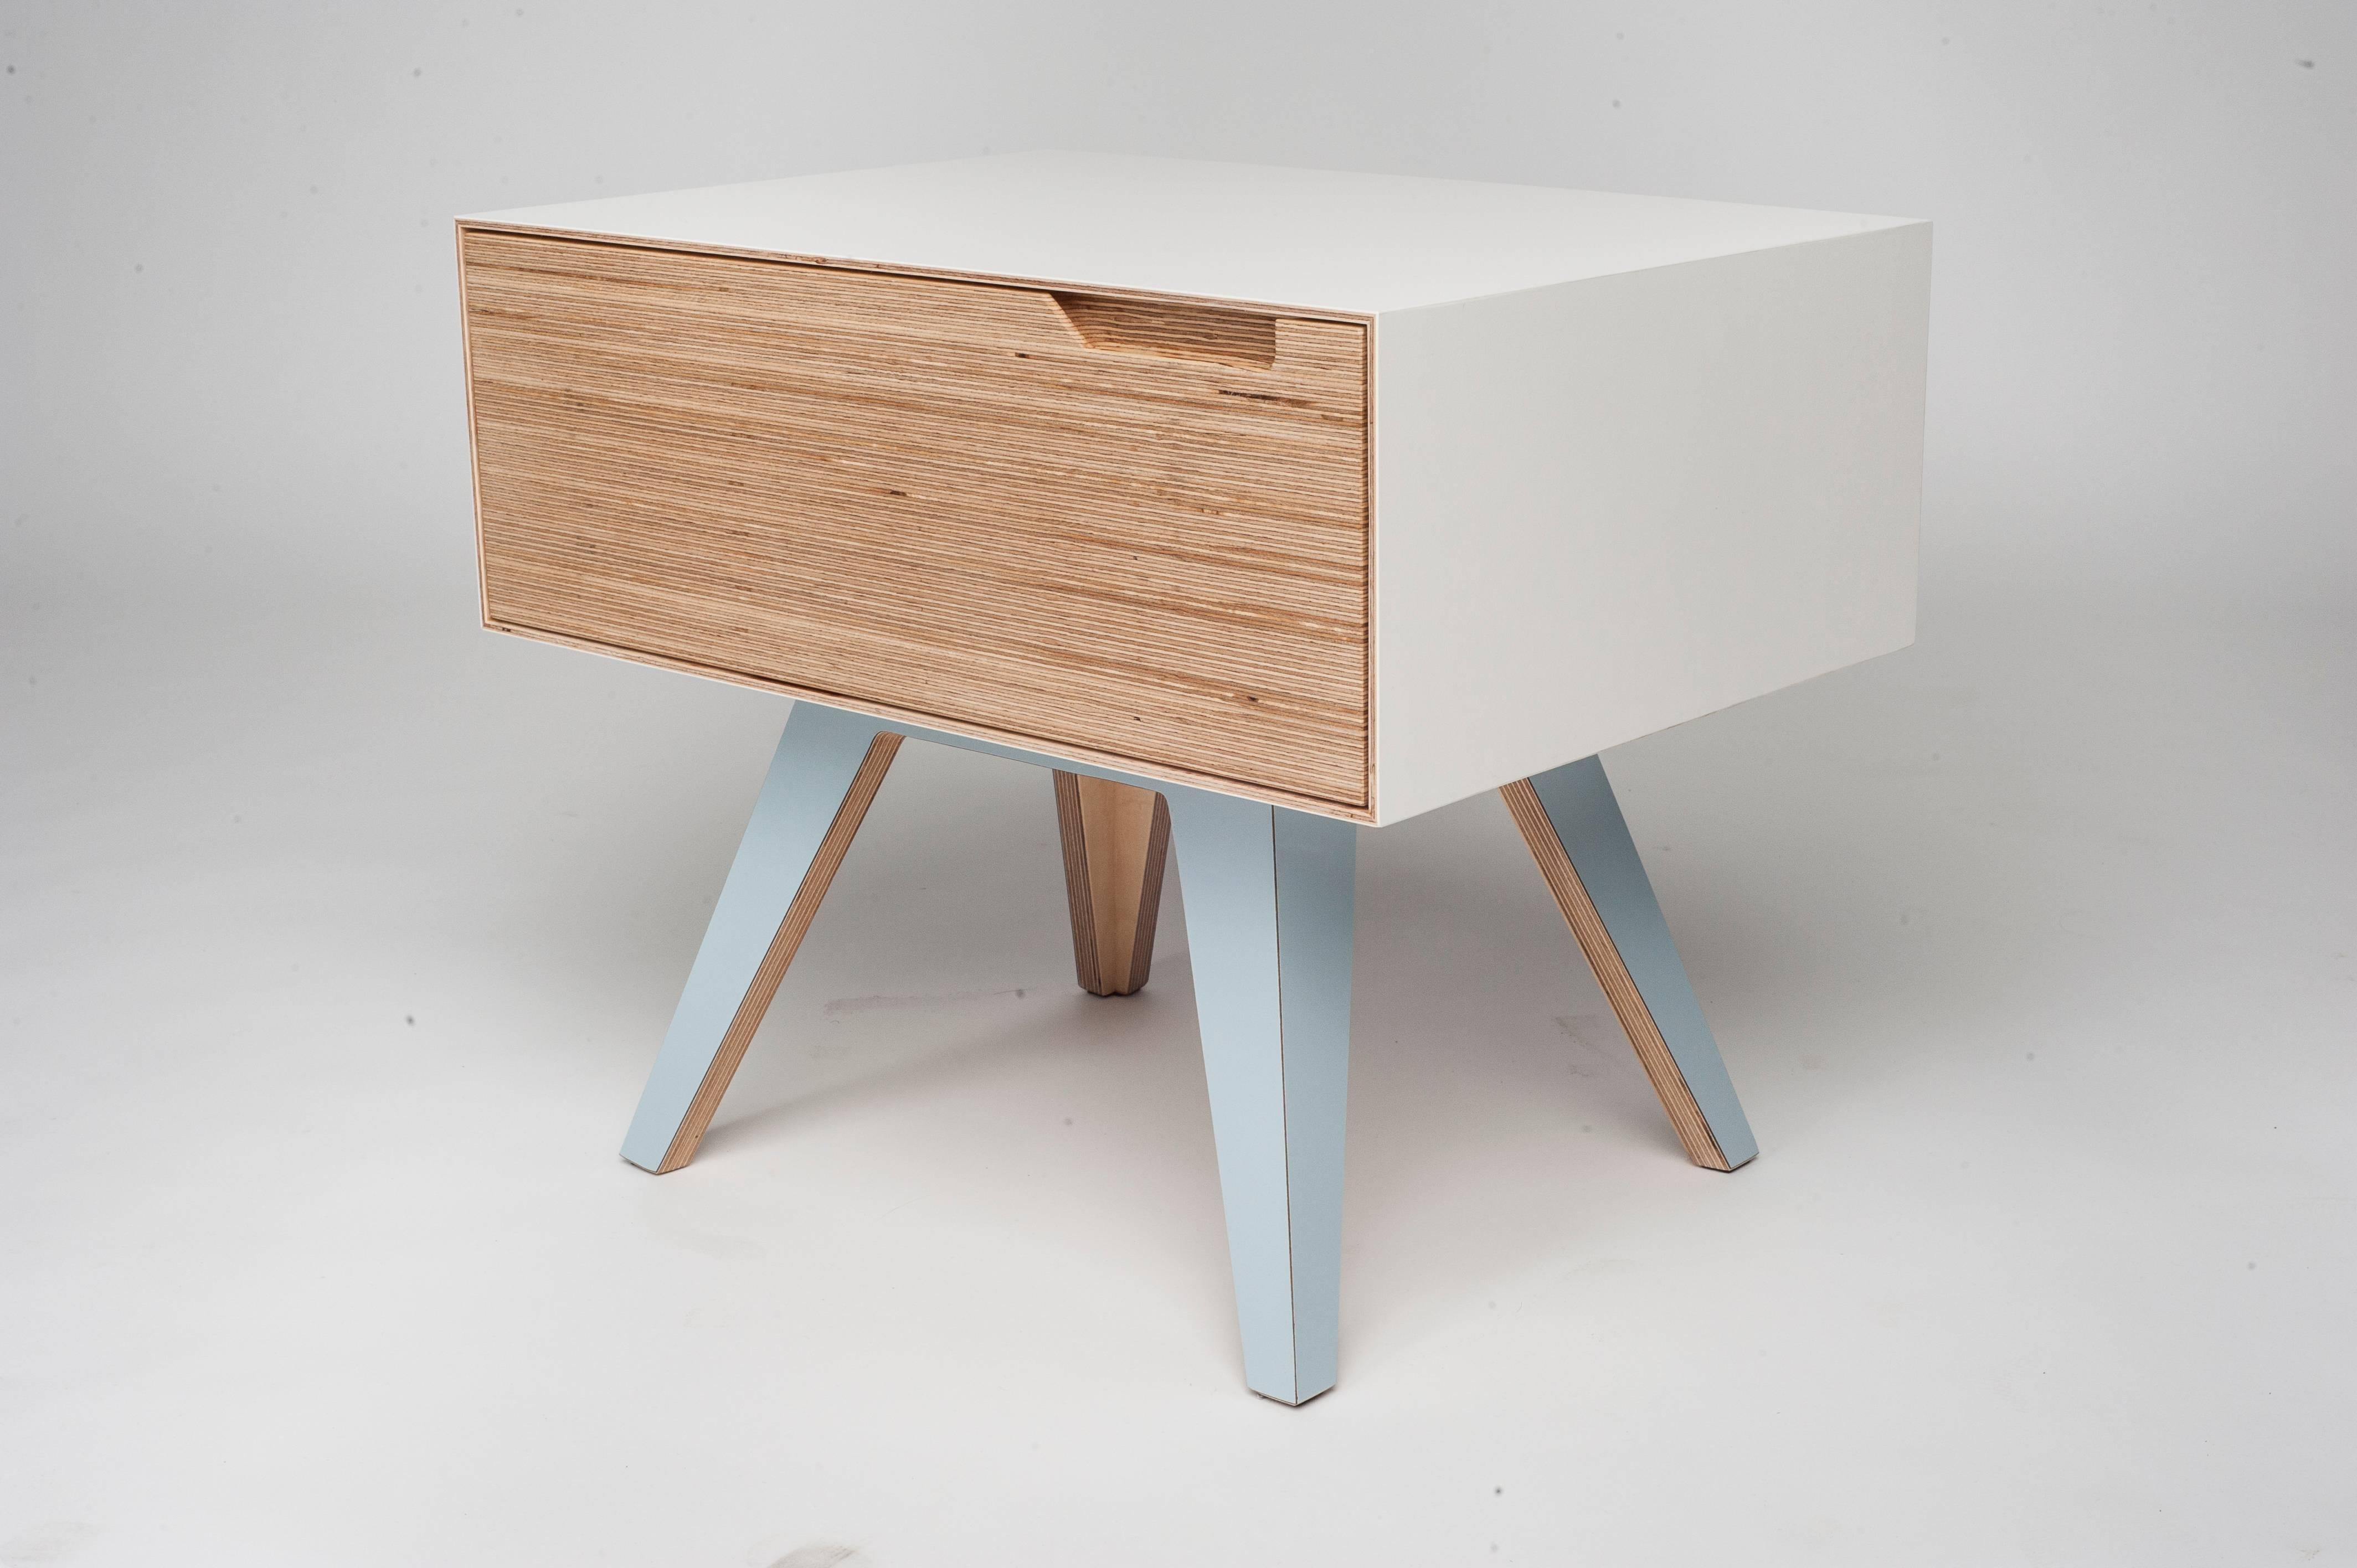 The Erbert nightstand is hand crafted and features a birch plywood end grain drawer front.
This piece is made to order so colored finishes and dimensions can be altered.